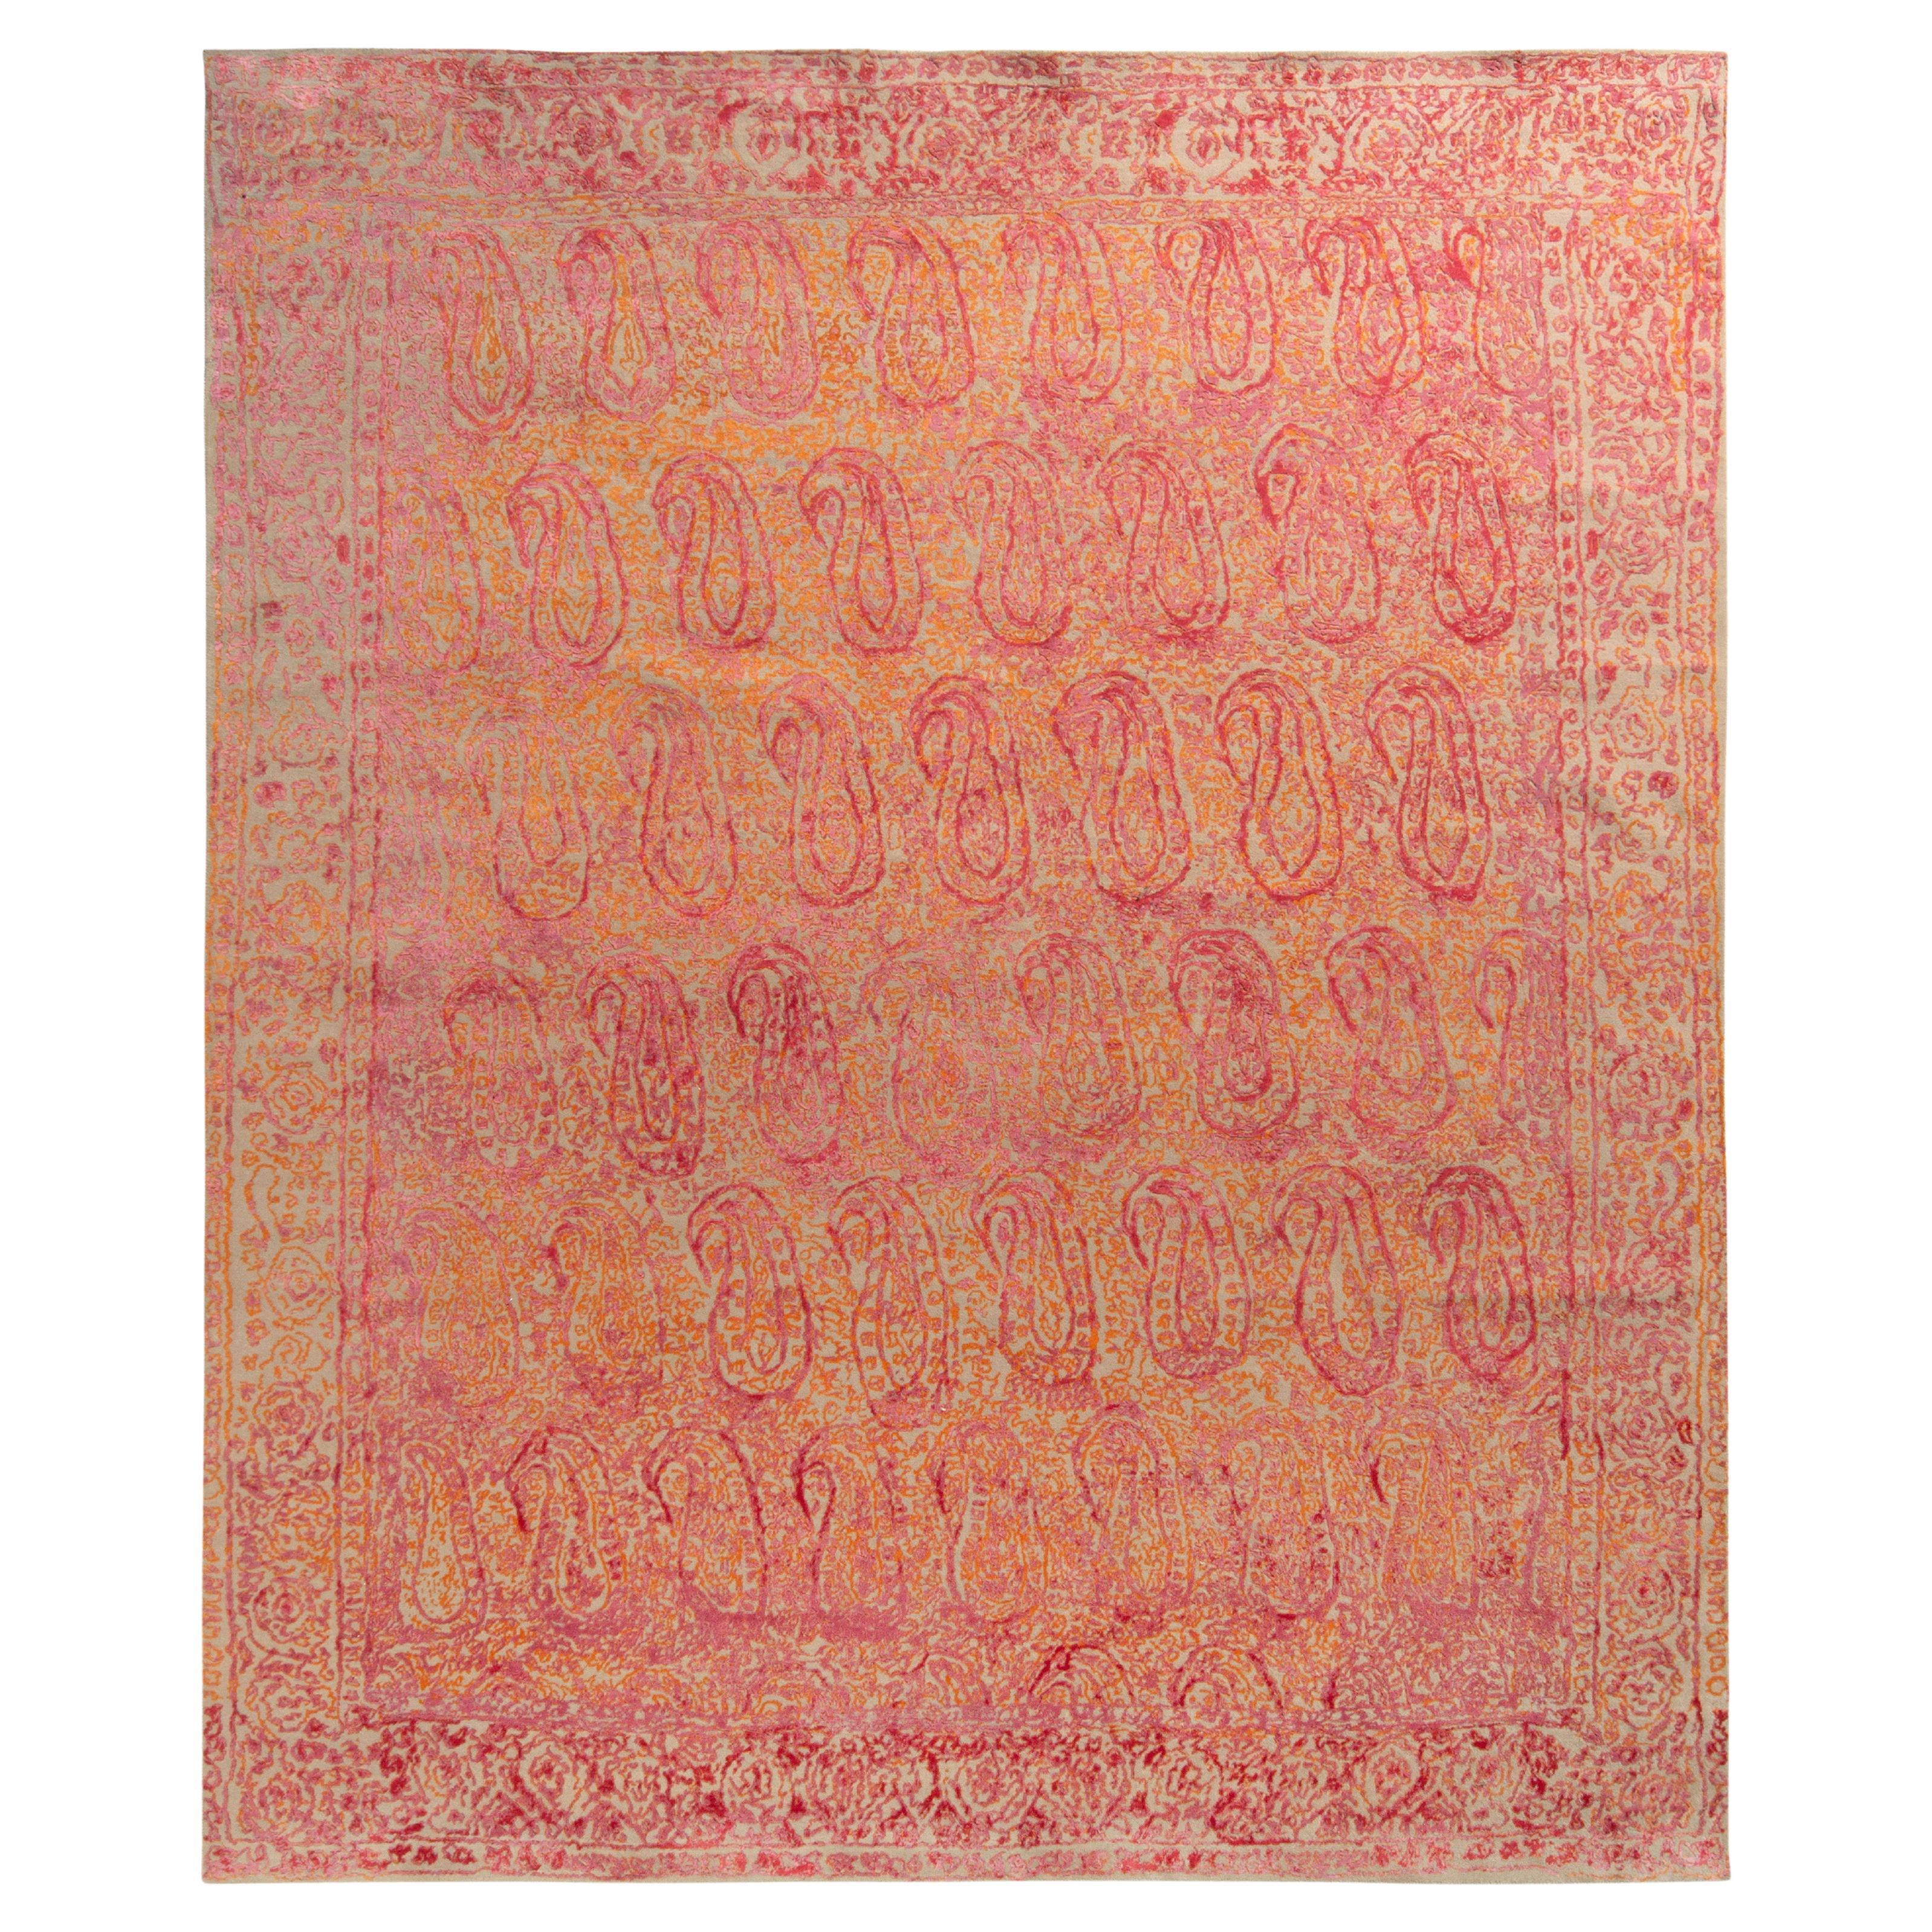 Rug & Kilim’s Paisley Style Transitional Rug in Red, Orange, Pink Floral Pattern For Sale